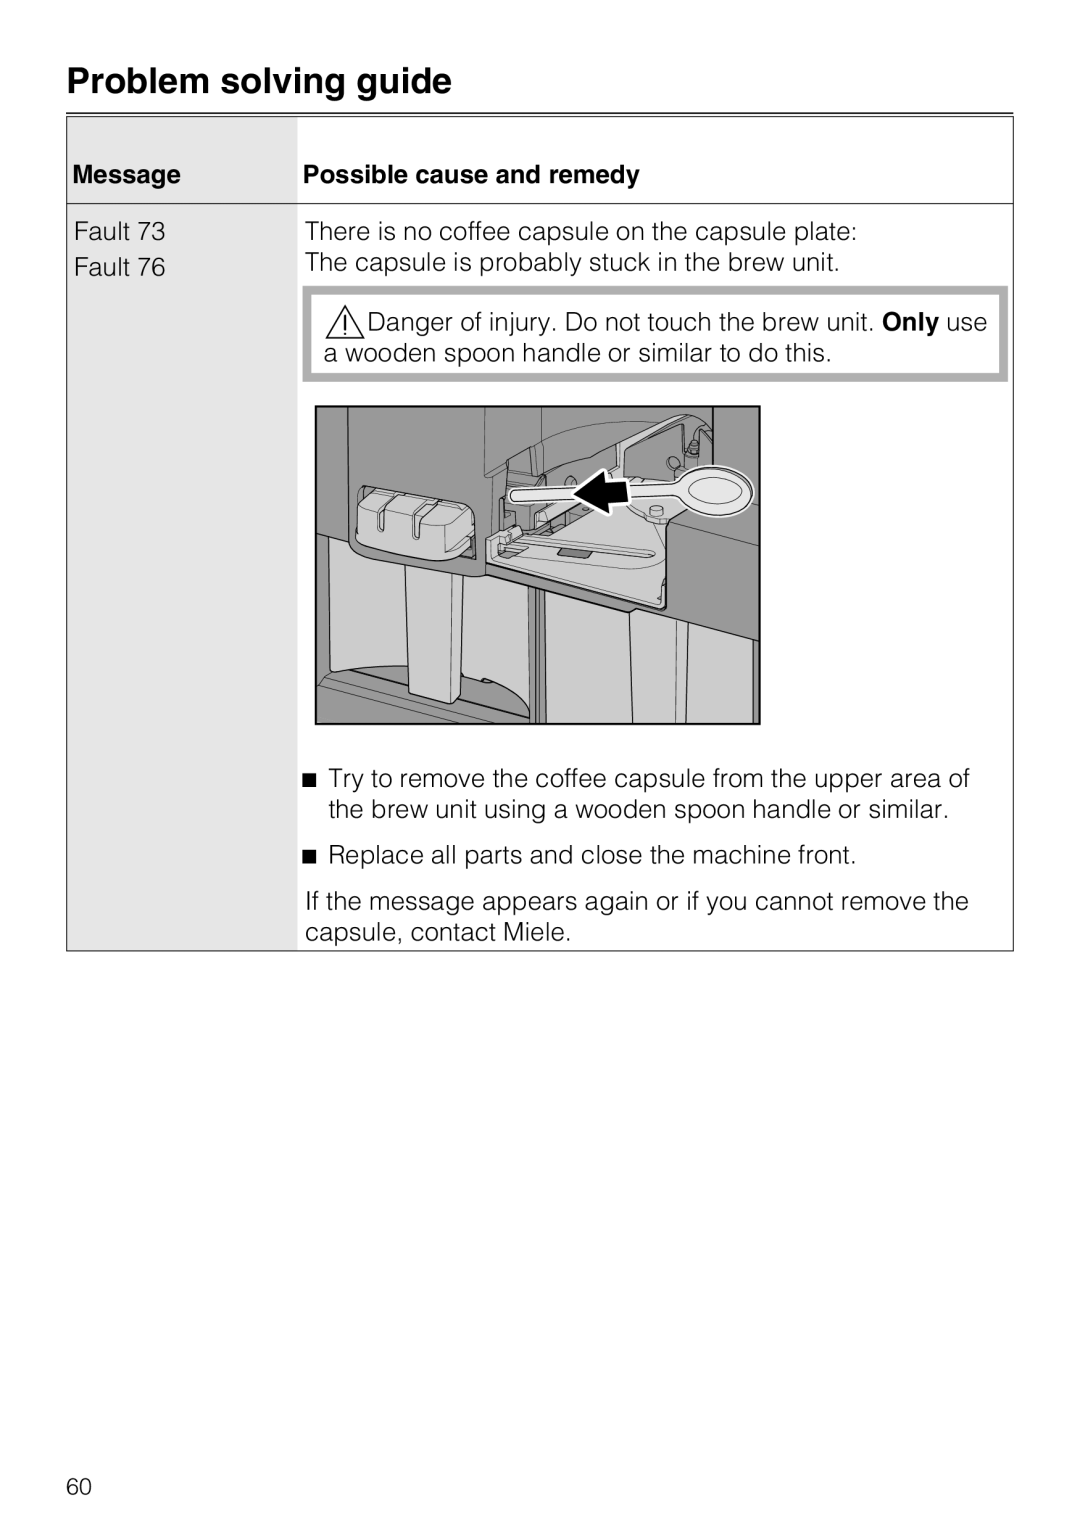 Miele CVA 6431 (C) installation instructions Problem solving guide, Message, Possible cause and remedy, Fault 73 Fault 